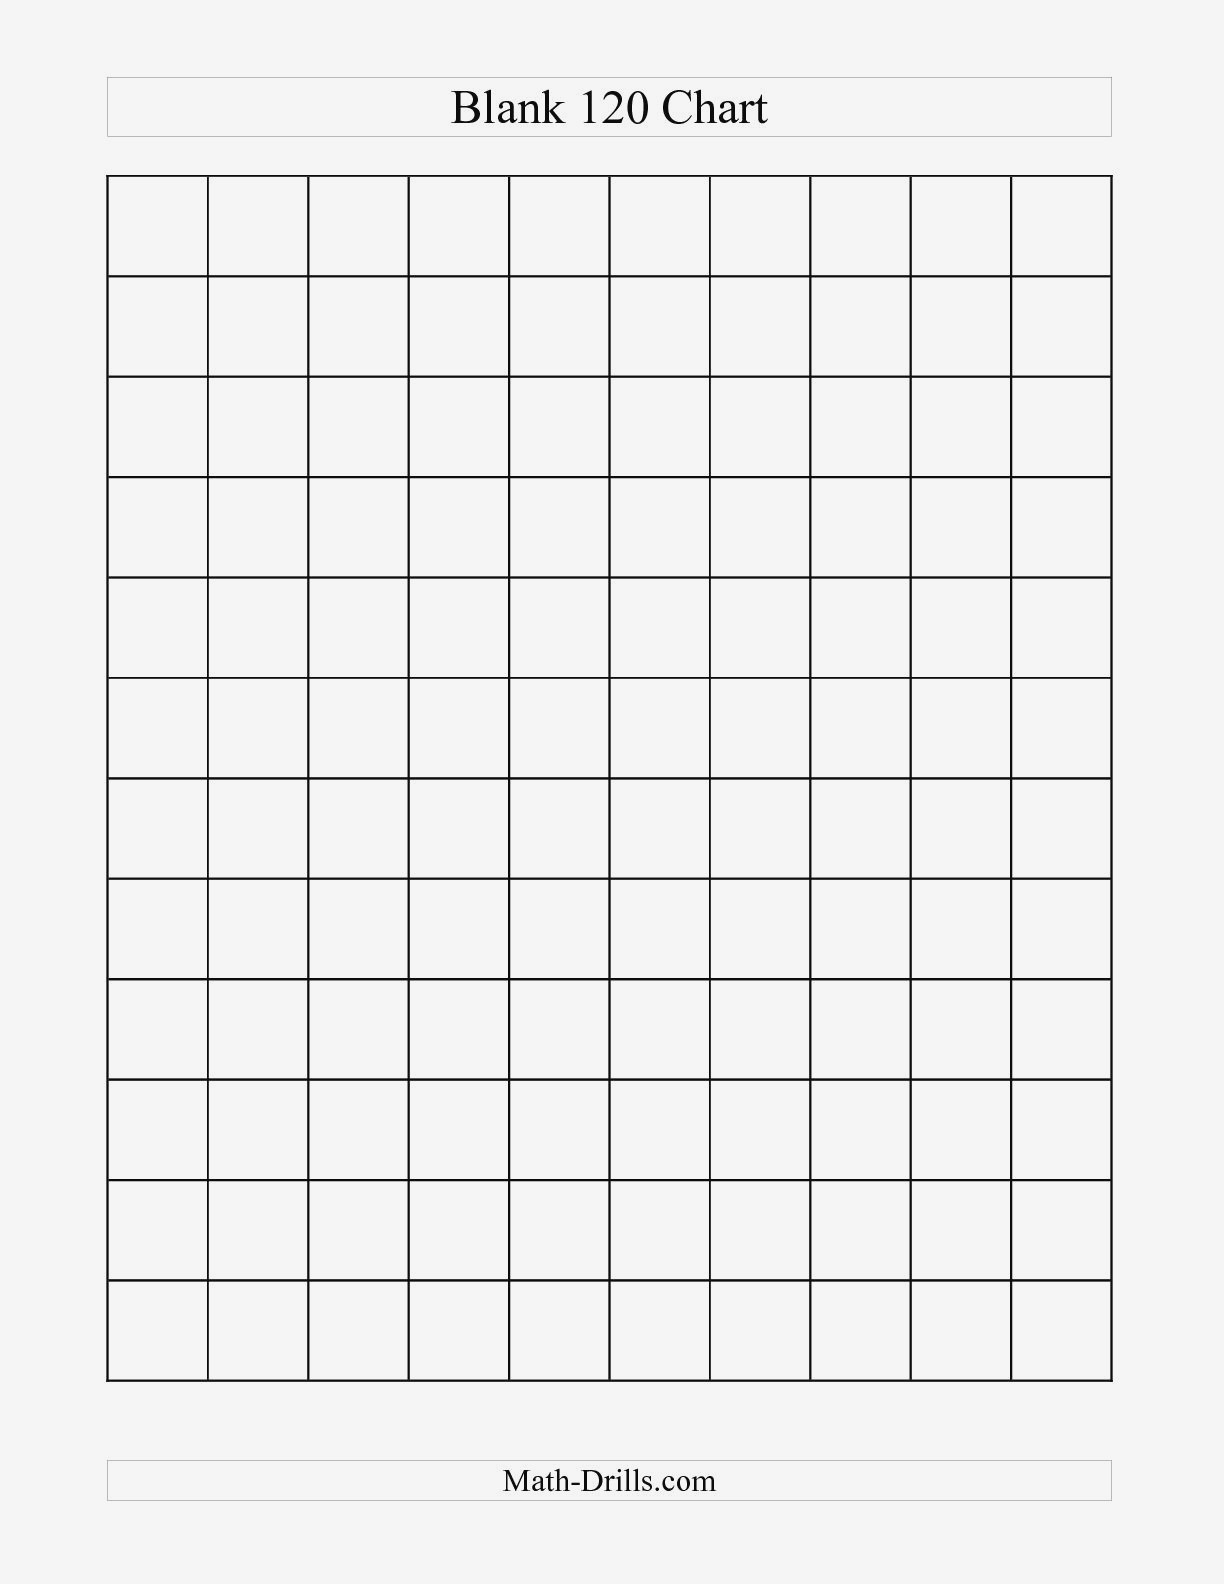 32. Best Photos Of Blank Hundreds Chart To 120 Printable Blank 120 - Free Printable Hundreds Chart To 120